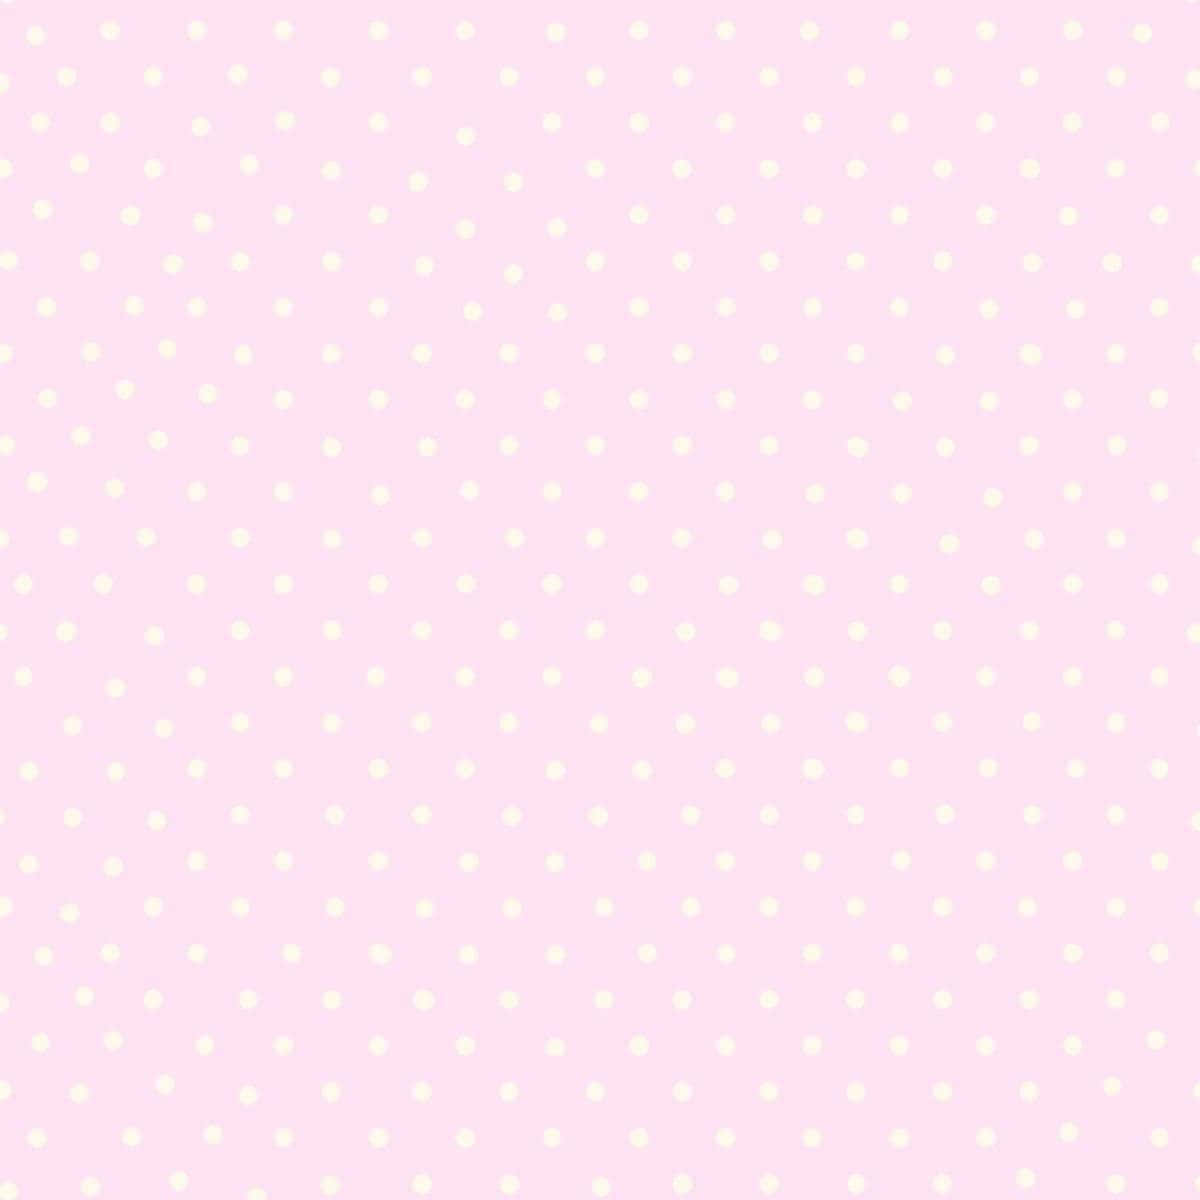 Brighten up any space with playful pink polka dots!